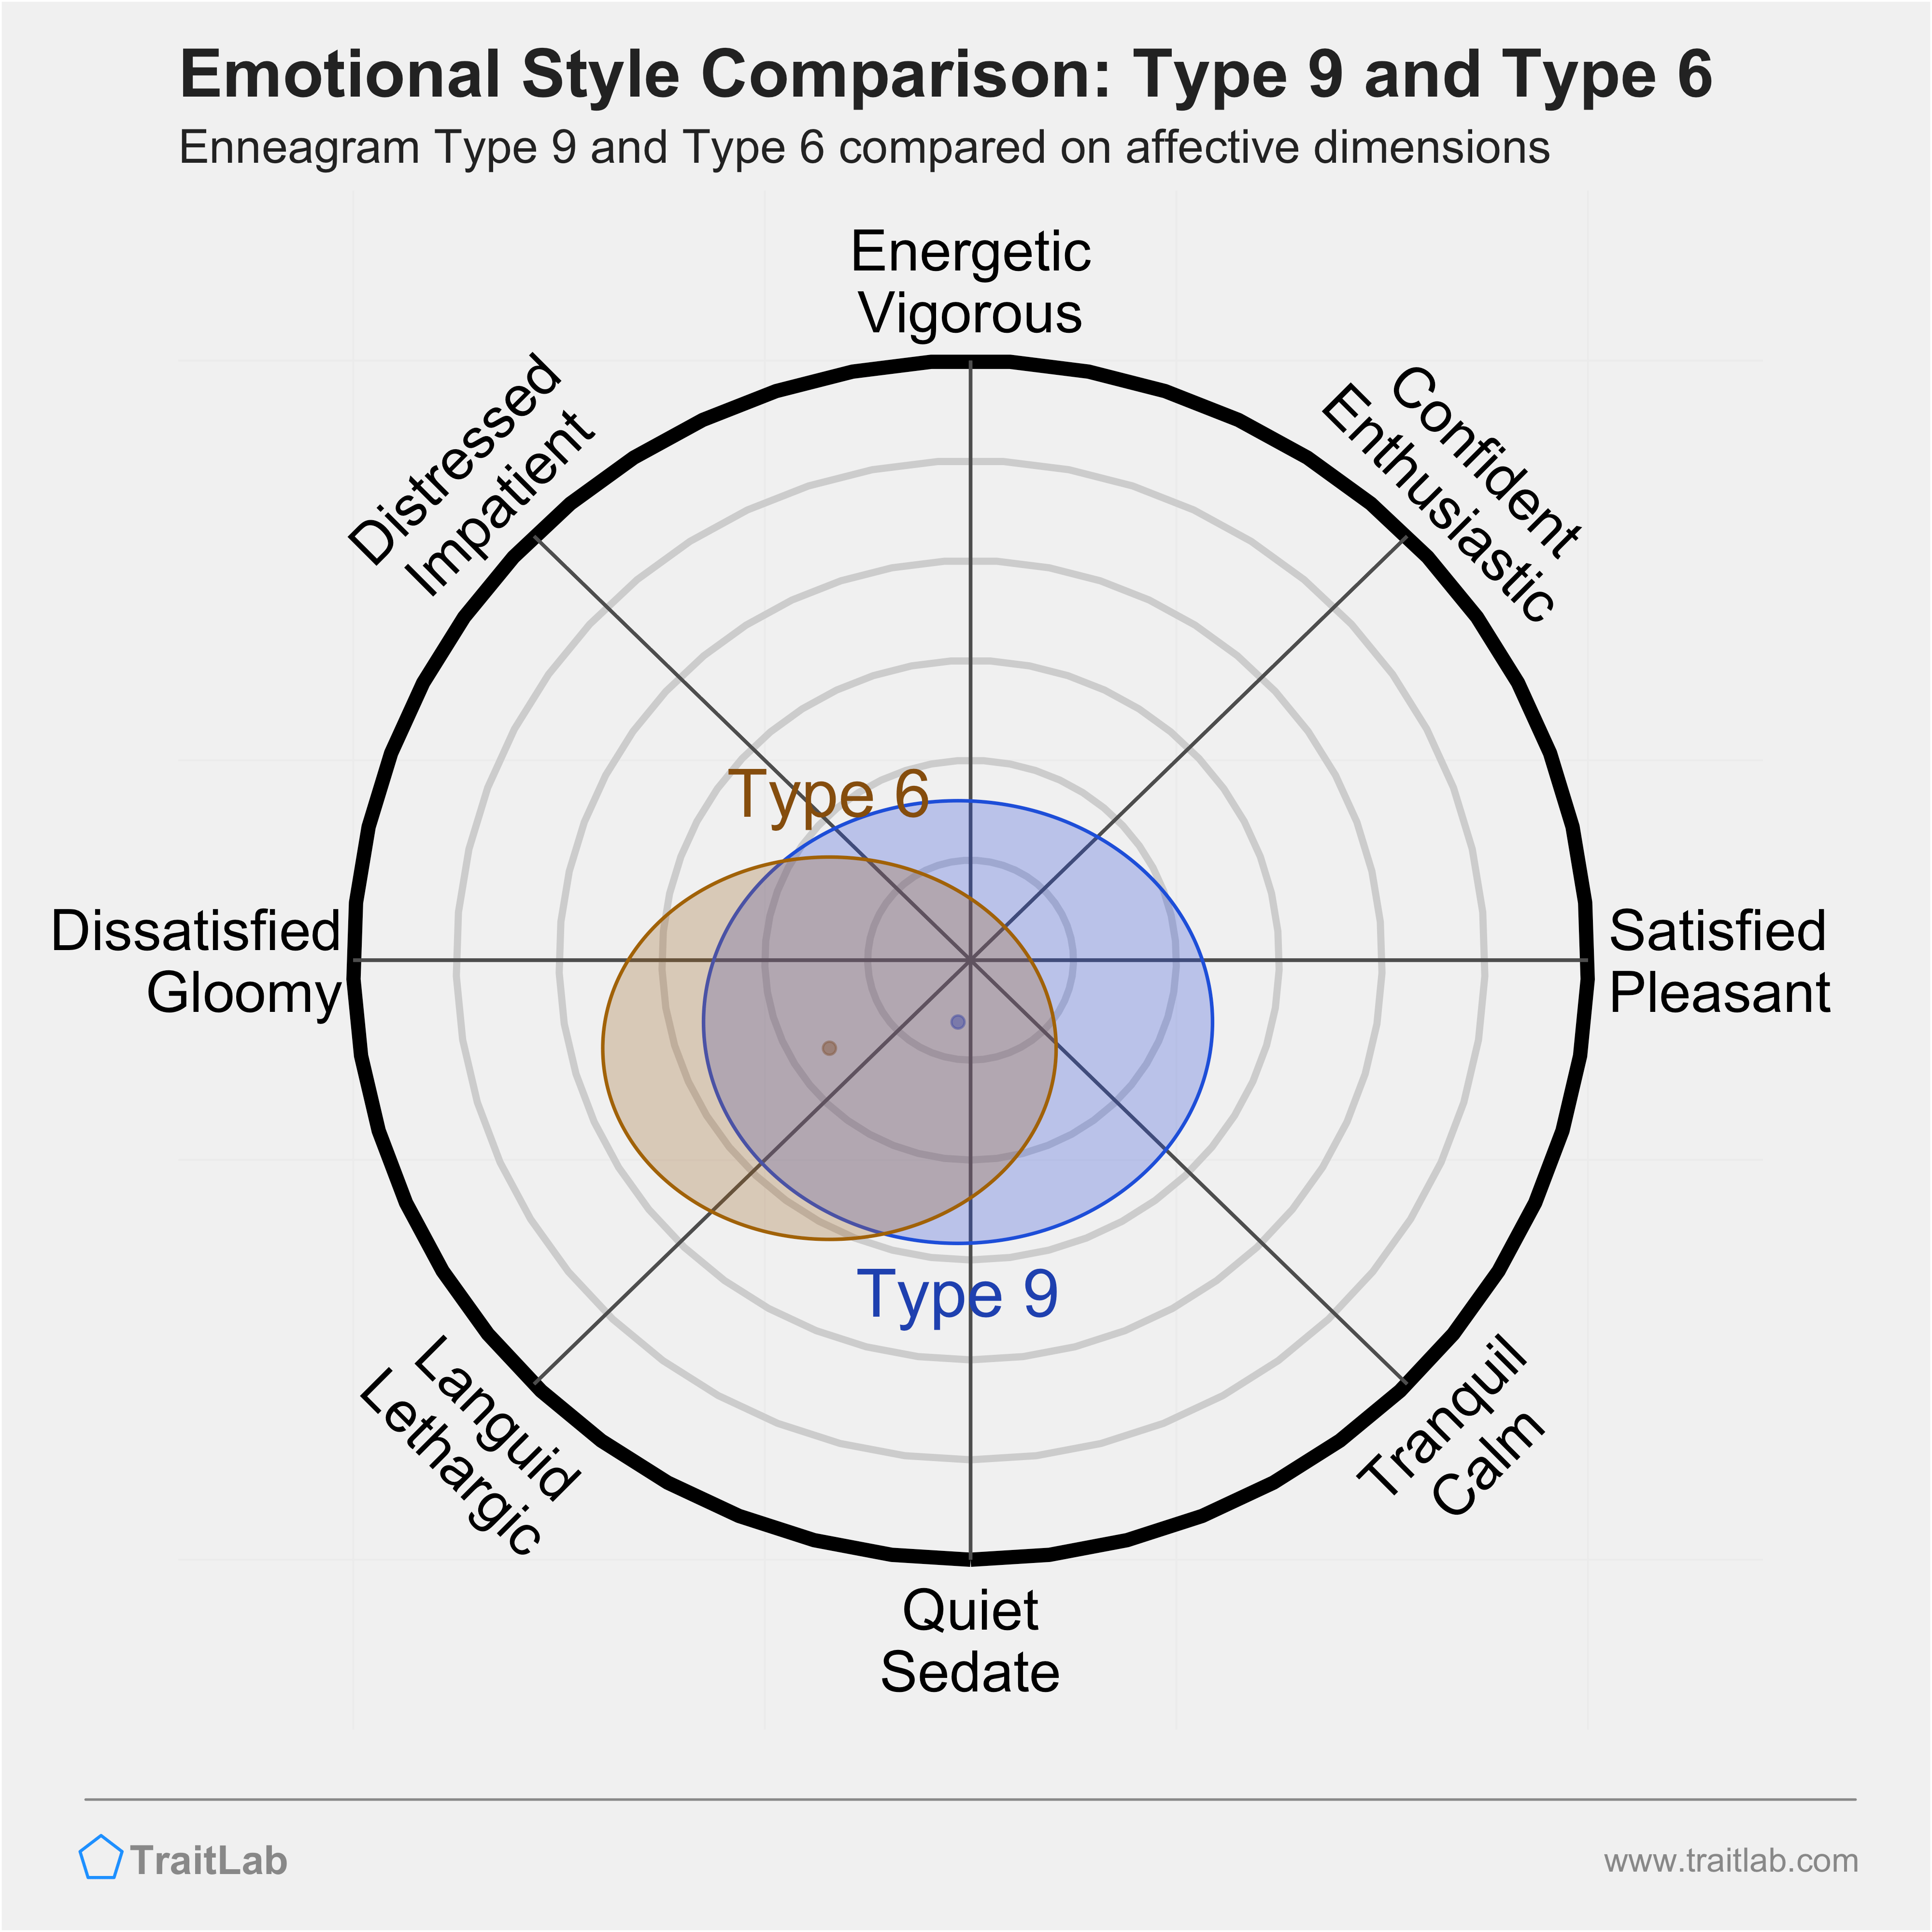 Type 9 and Type 6 comparison across emotional (affective) dimensions